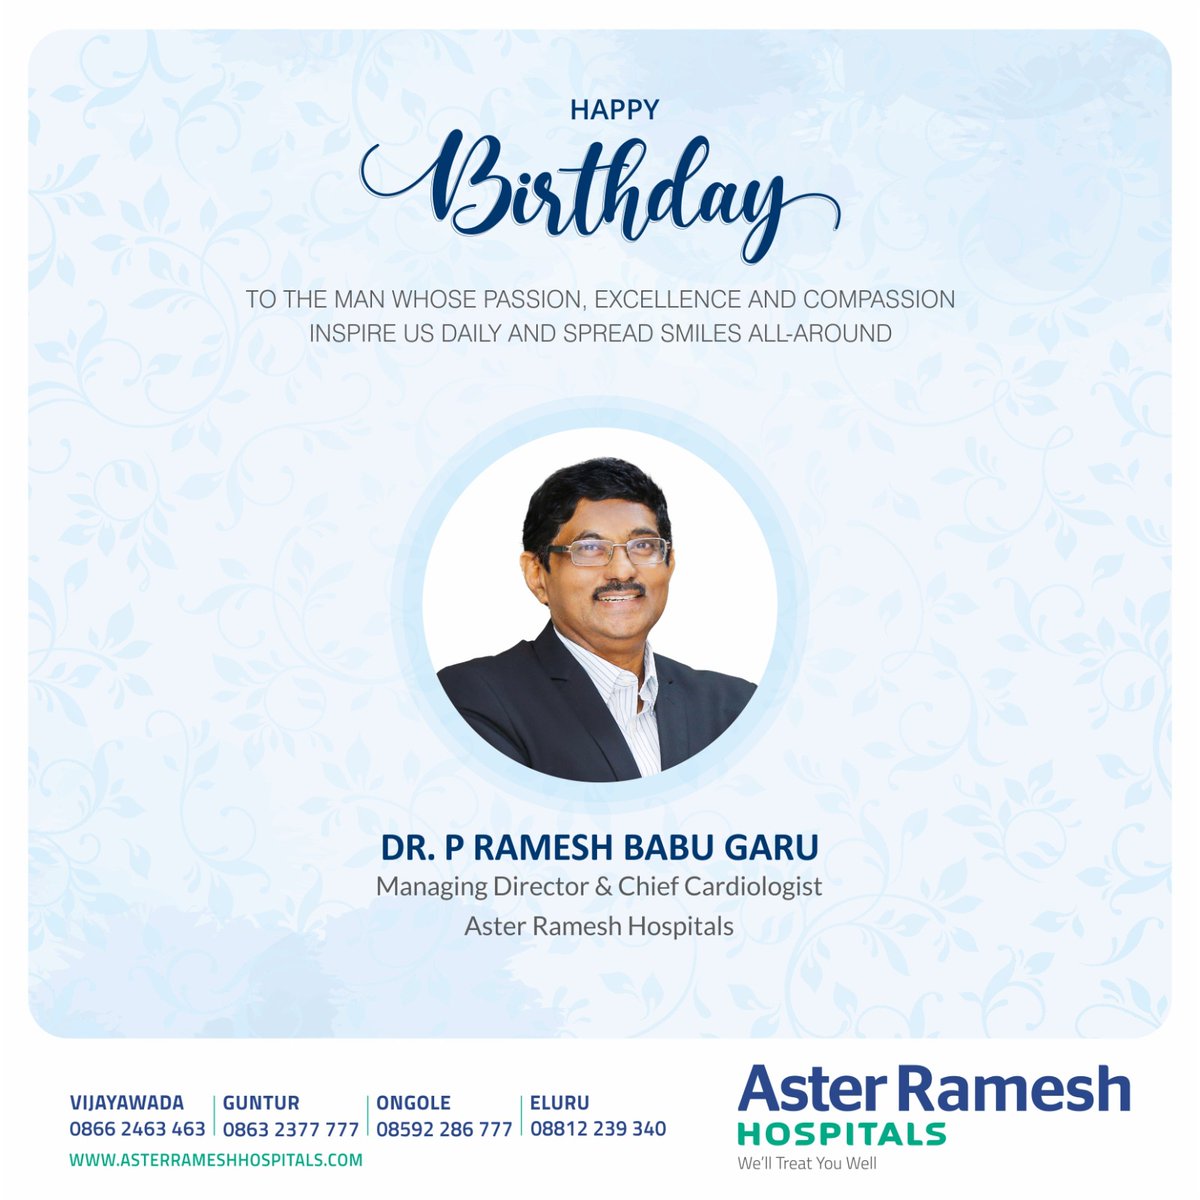 Heartiest greetings to a doctor and leader par excellence. Best wishes for health and success as you continue to make a difference to people's lives. Happy Birthday!

#asterrameshhospitals #happybirthday #bestwishes #drprameshbabu #doctor #leaderparexcellence #ManagingDirector